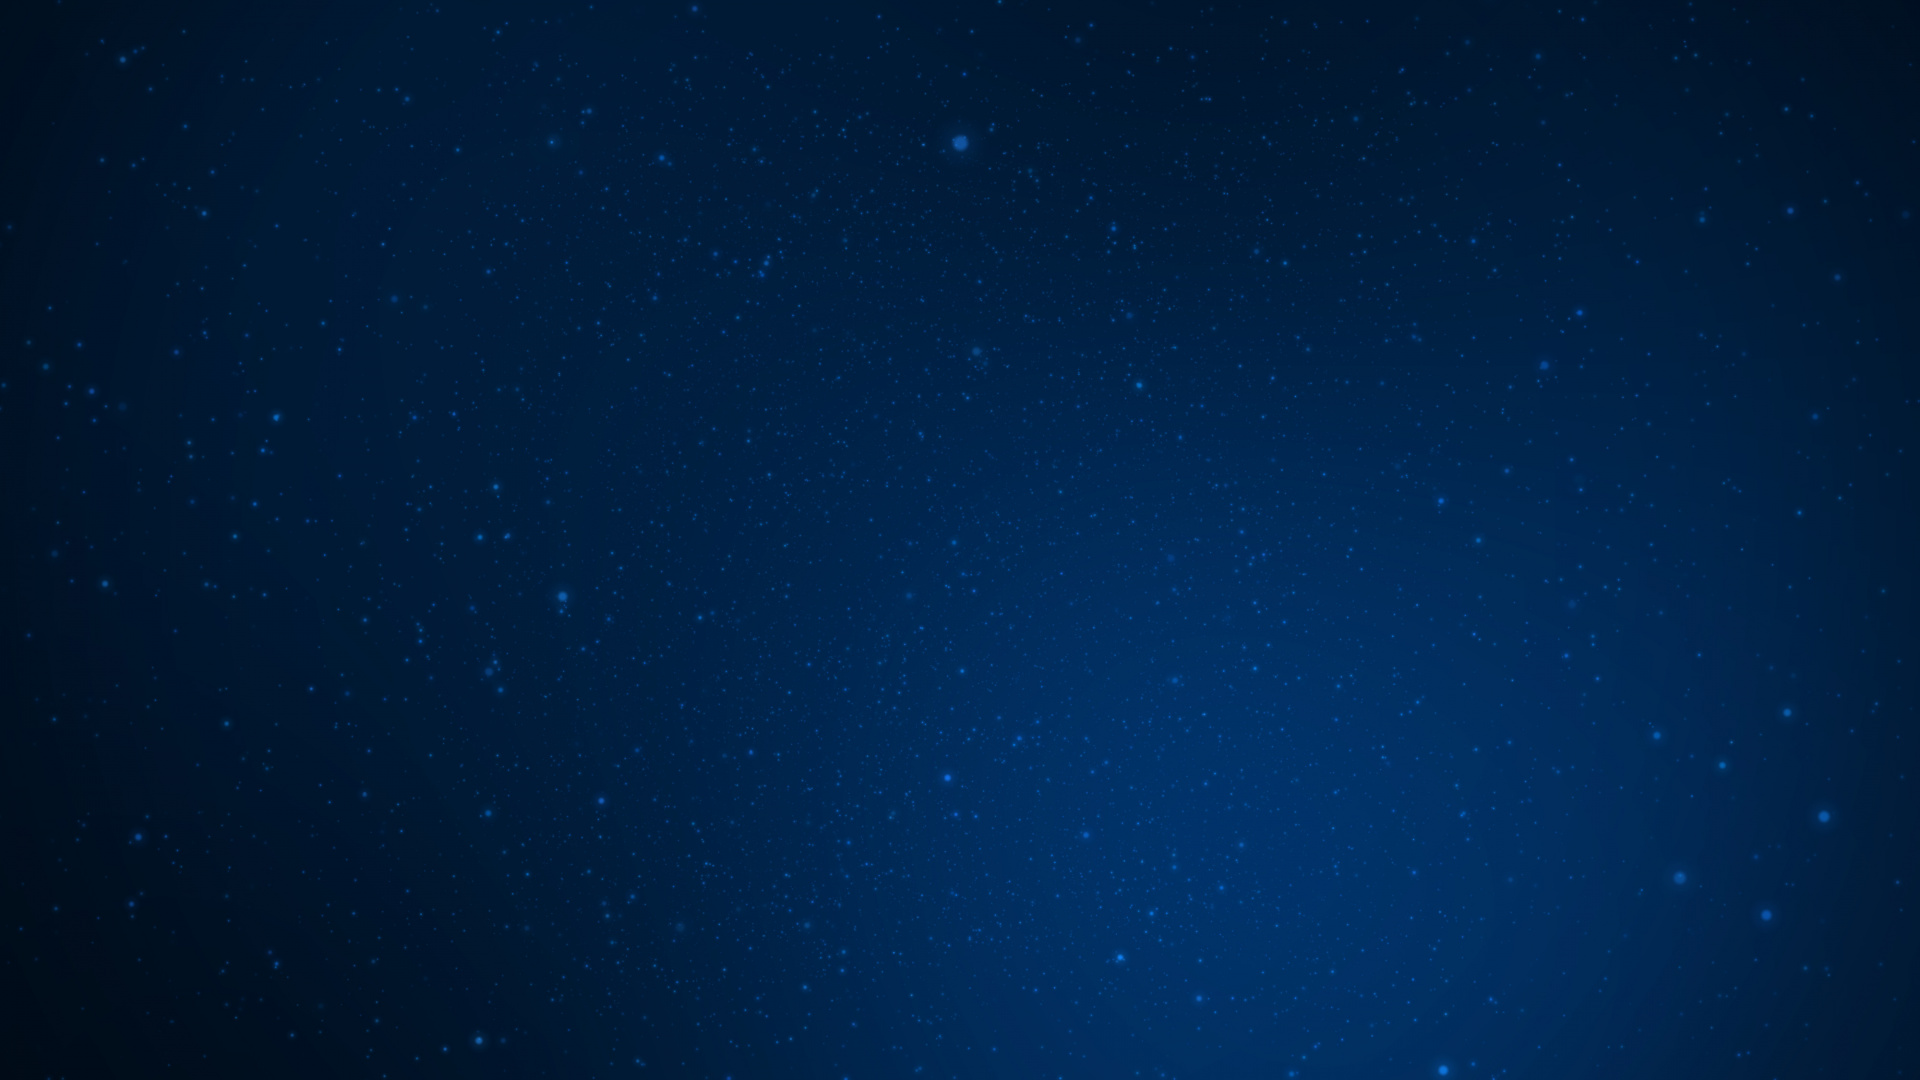 Blue Sky With Stars During Night Time. Wallpaper in 1920x1080 Resolution